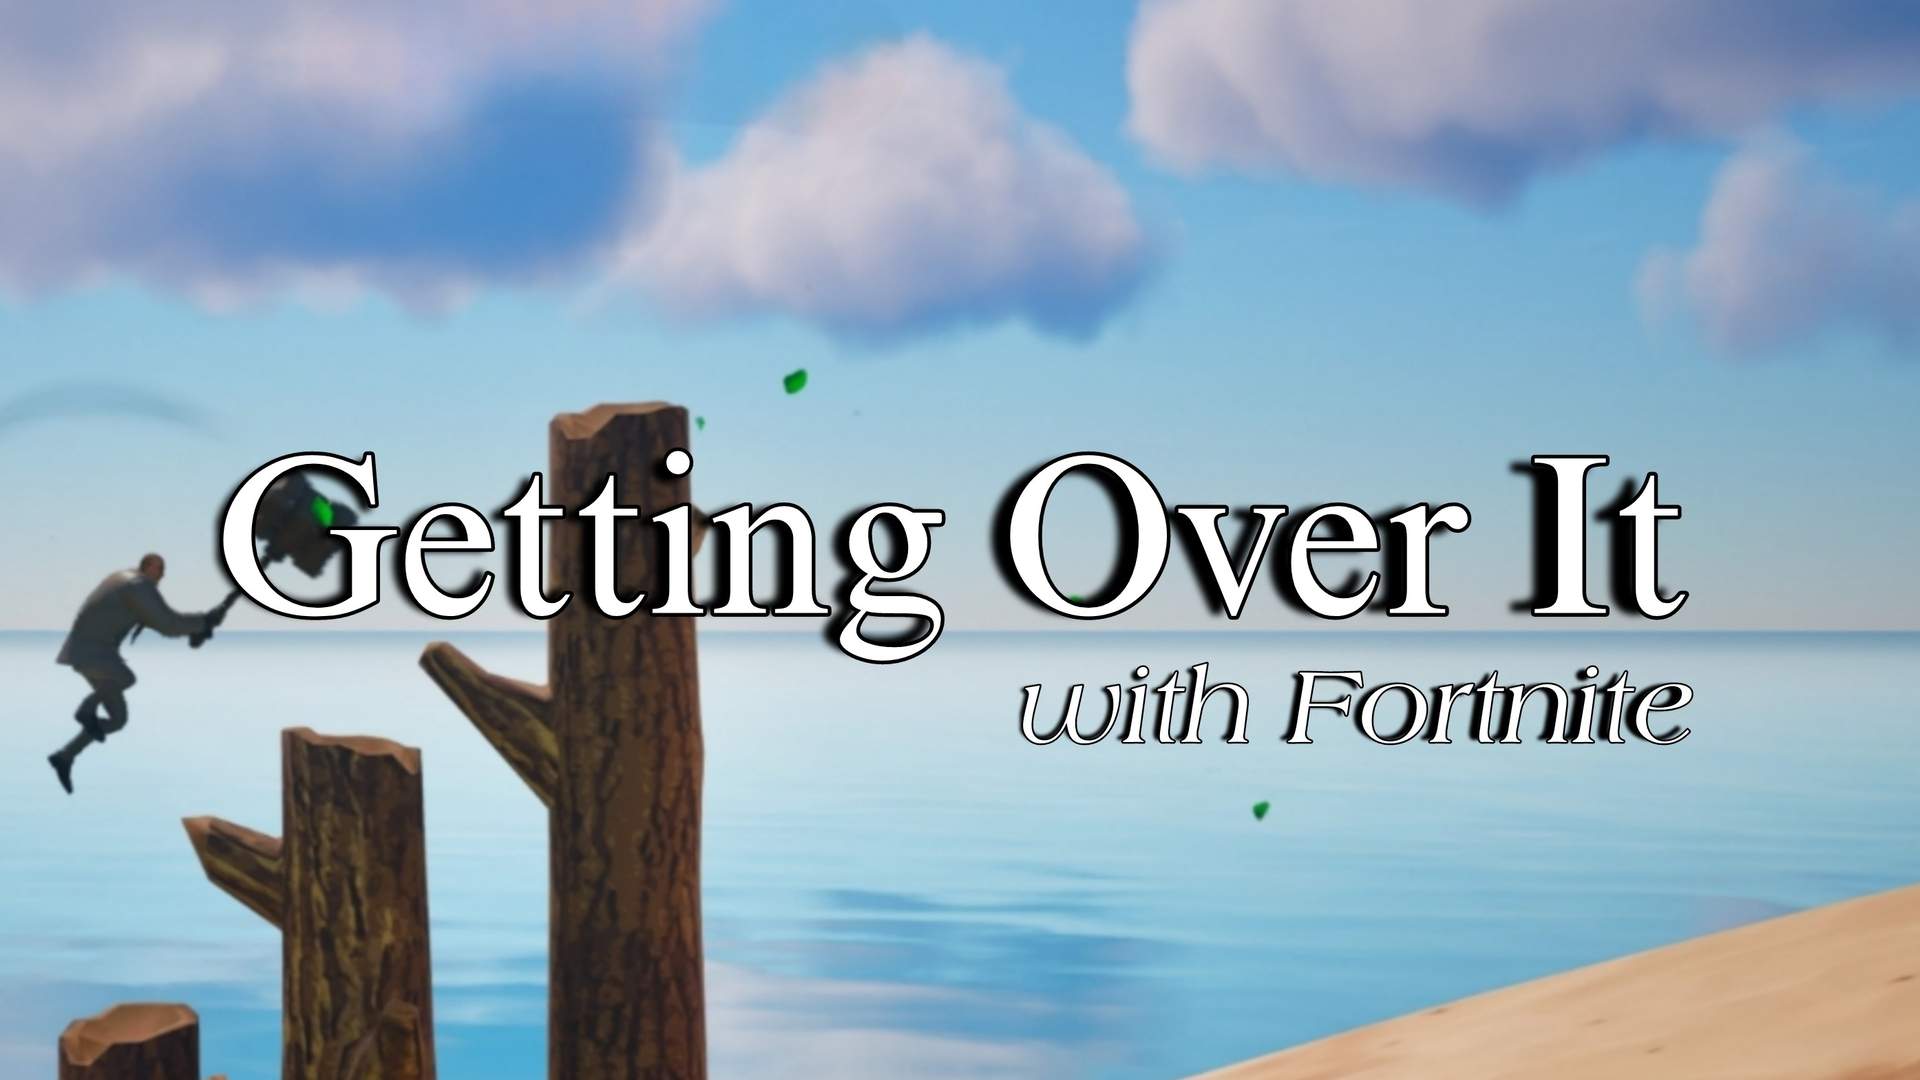 Getting Over It - Fortnite Edition 4141-3760-0680 by michadestroy -  Fortnite Creative Map Code 